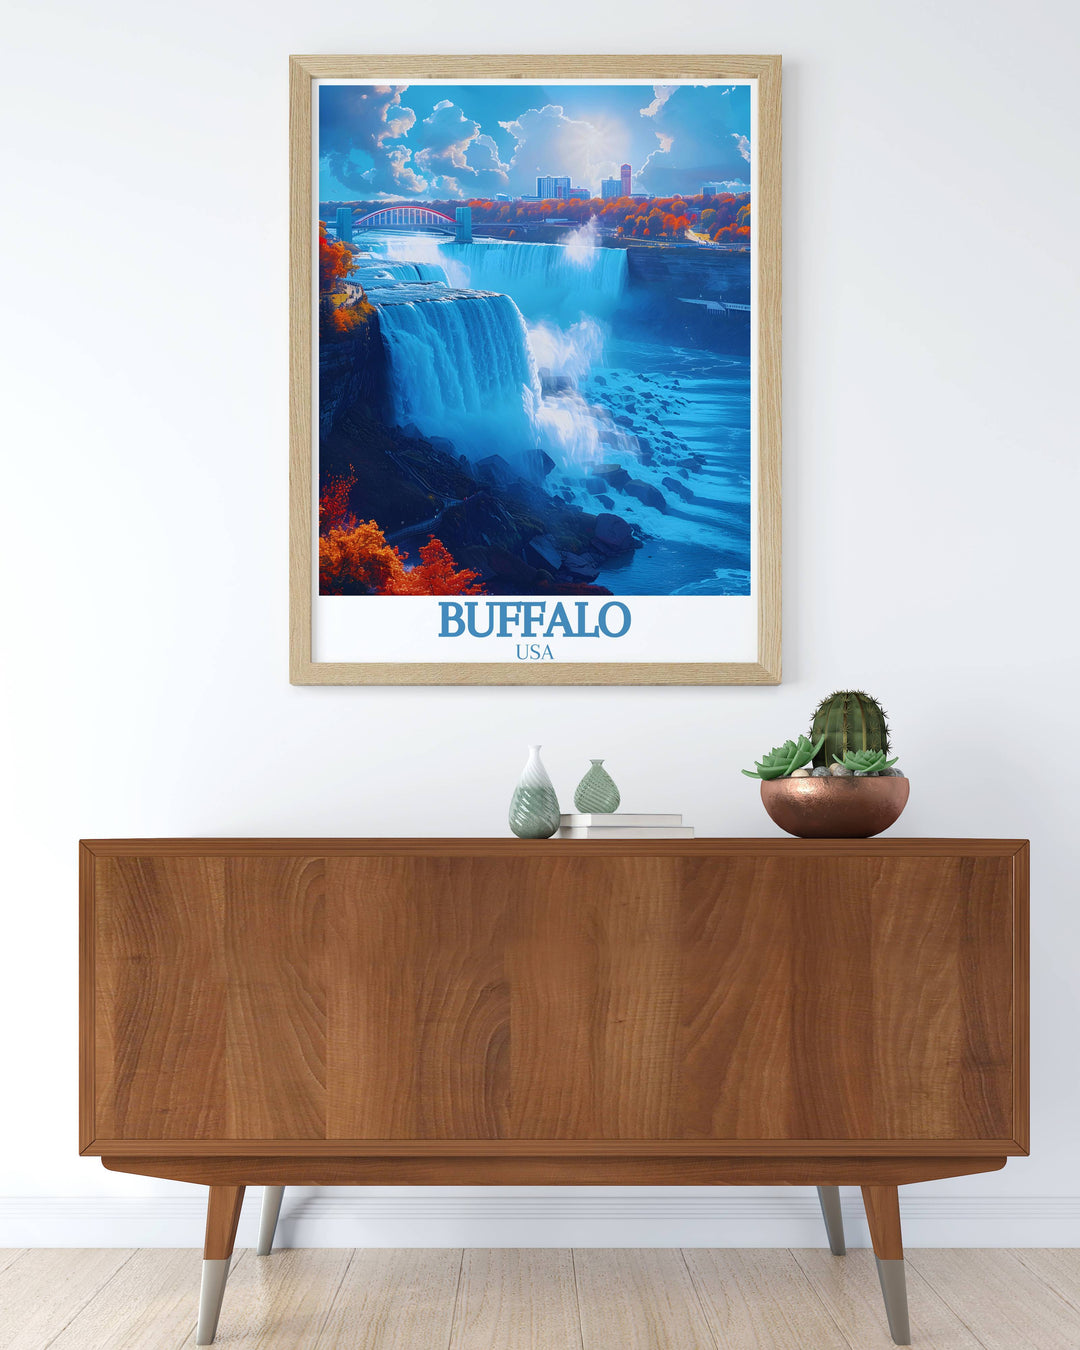 Stunning Niangara Falls wall art and Buffalo photography highlighting the natural beauty and architectural splendor of the city ideal for enhancing your home decor with a touch of elegance